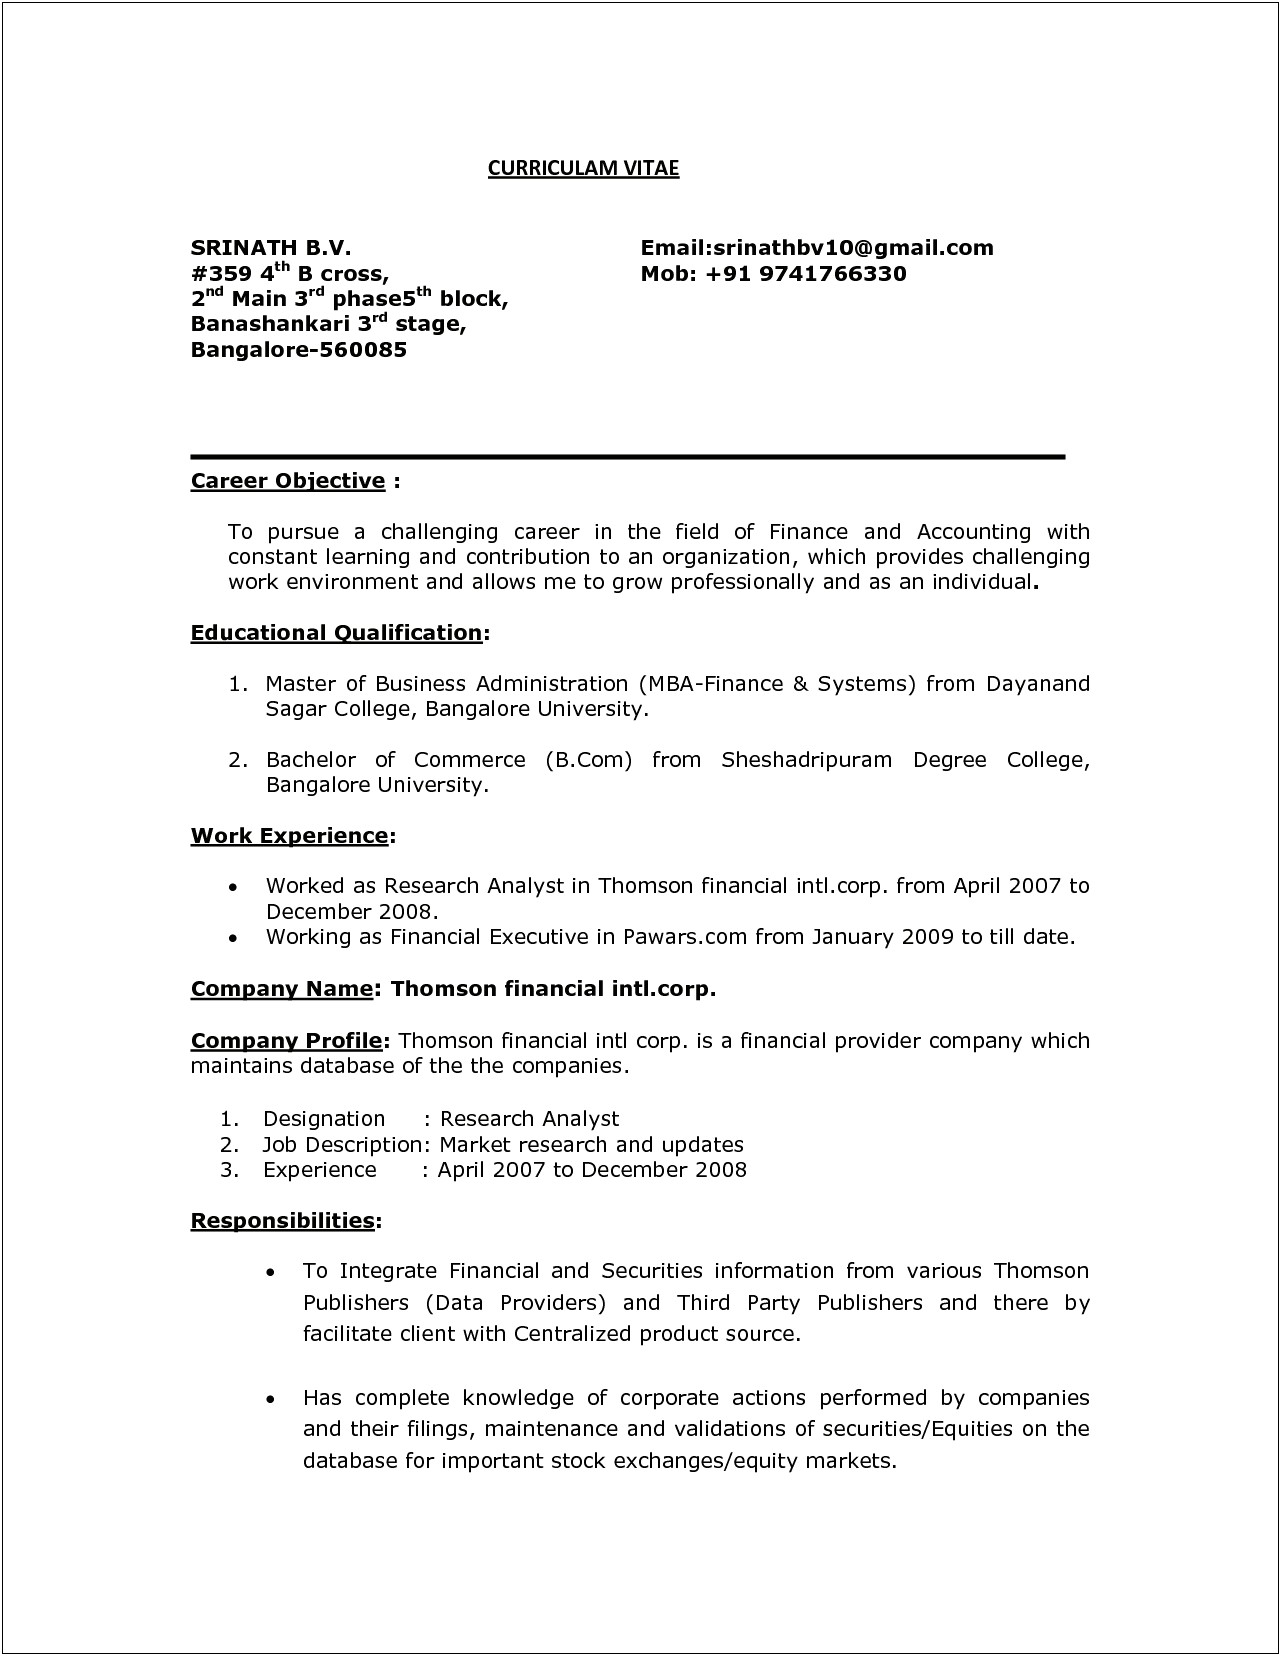 Resume Objective For Job In Finance